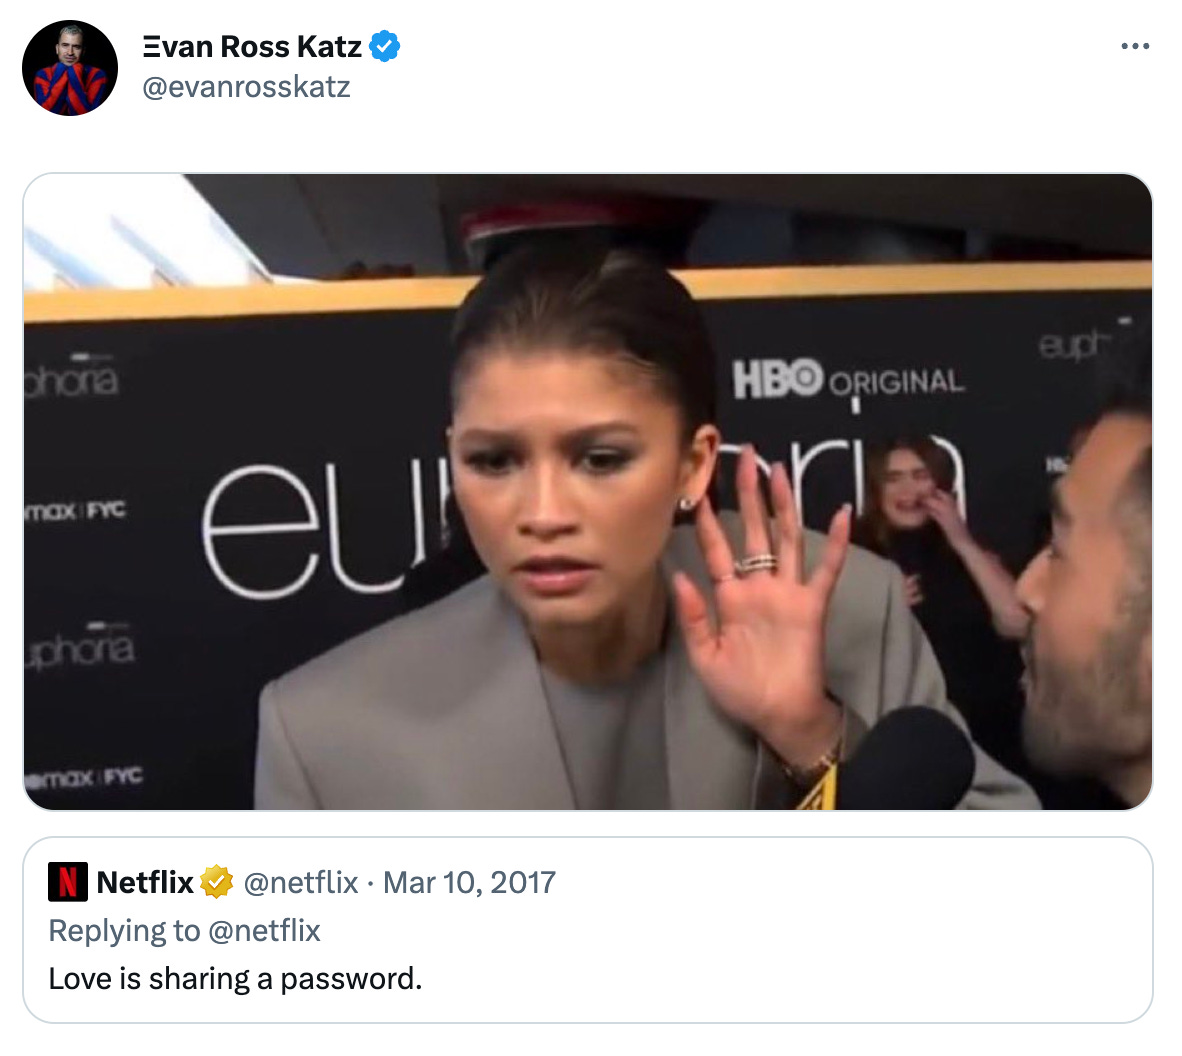 tweet from evan ross katz @evanrosskatz of an image of zendaya on the red carpet with her hand behind her ear to listen better, quote tweeting a 2017 tweet from netflix that says "love is sharing a password"